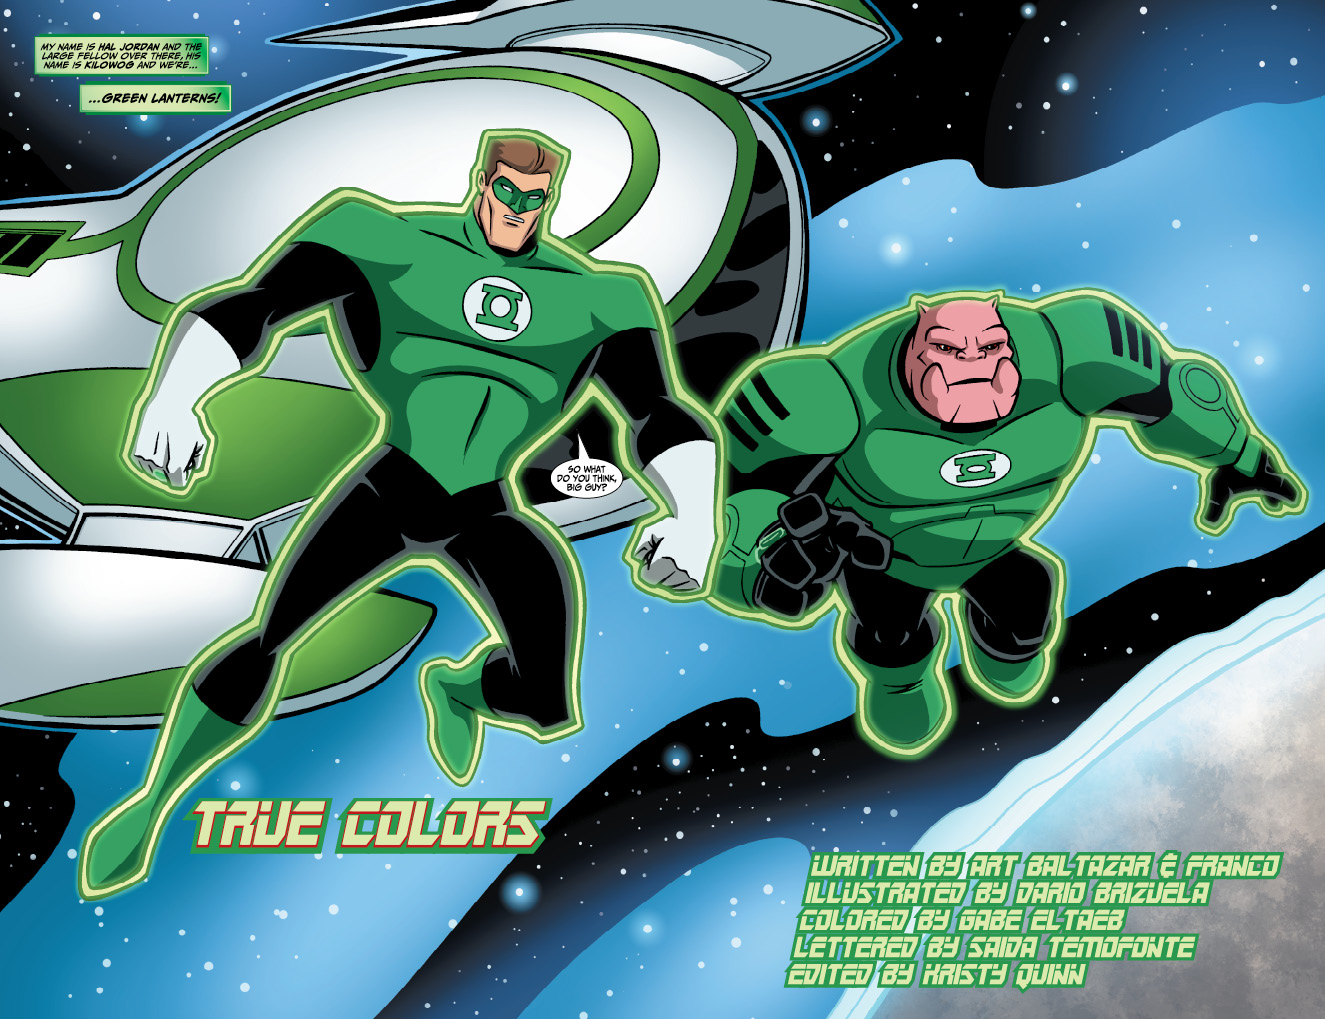 Preview from Green Lantern: The Animated Series #0 - Comic Art Community  GALLERY OF COMIC ART